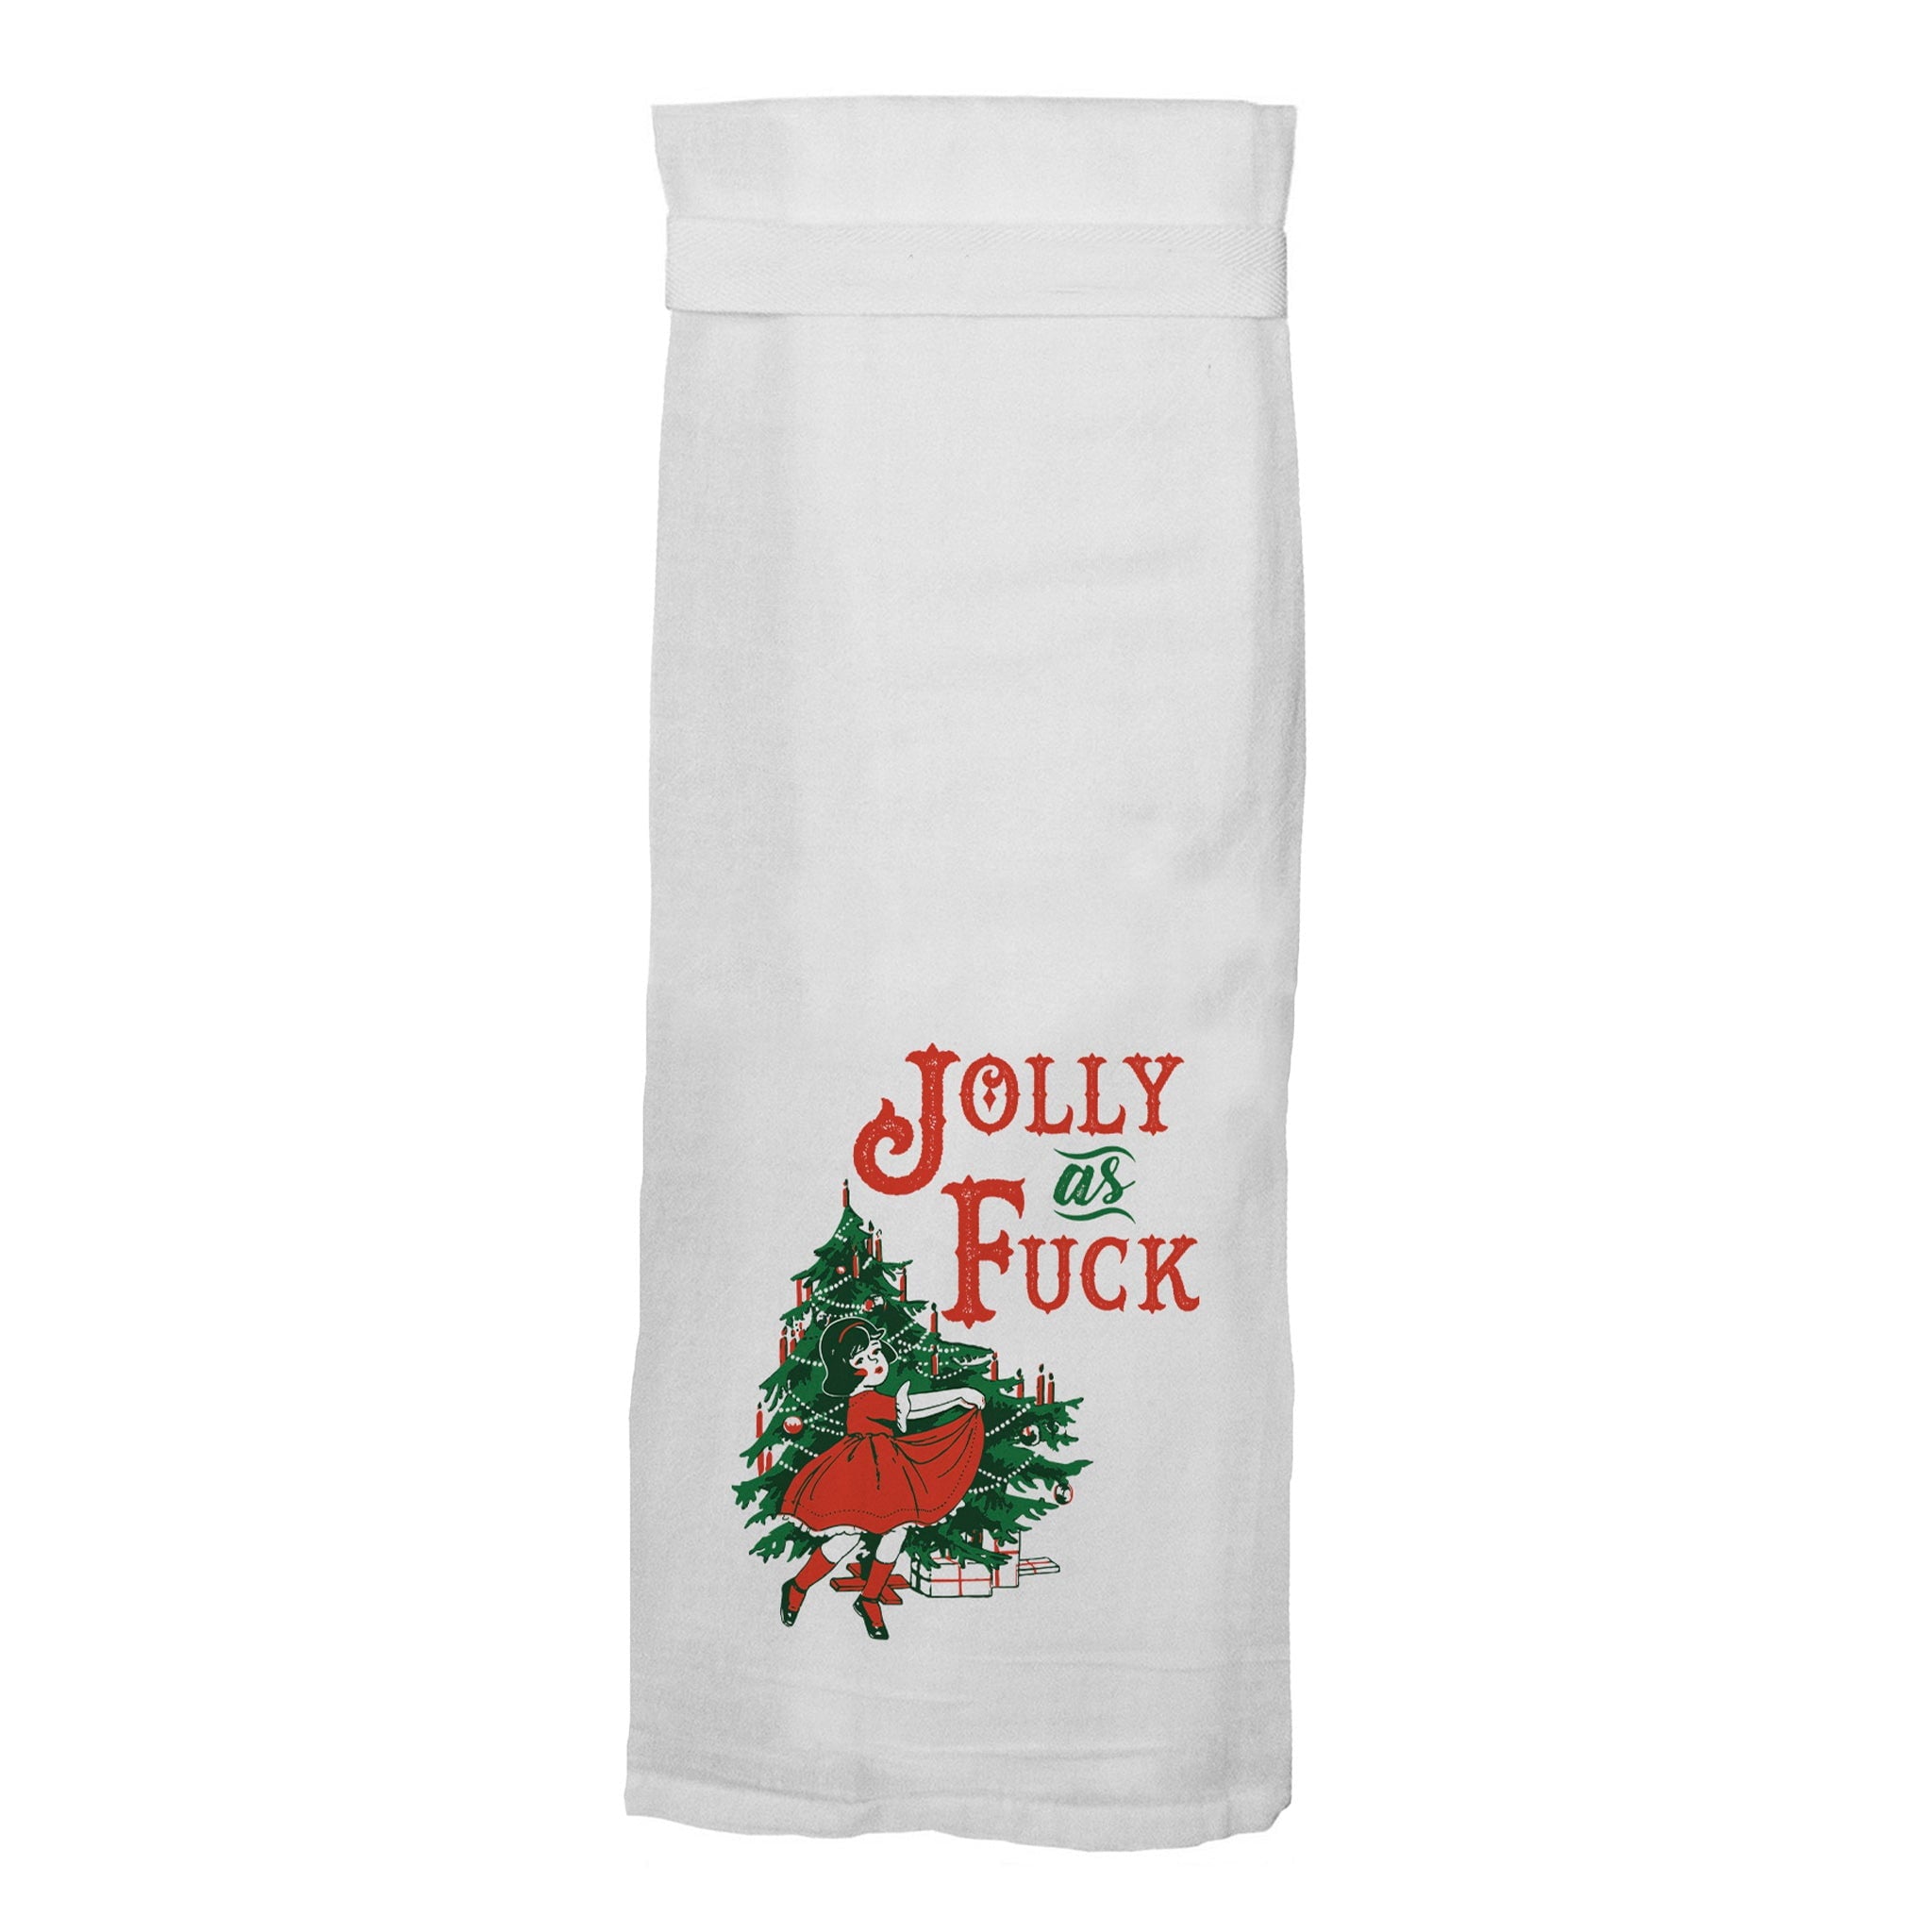 Jolly As Fuck Flour Sack Hang Tight Towel - Twisted Wares®